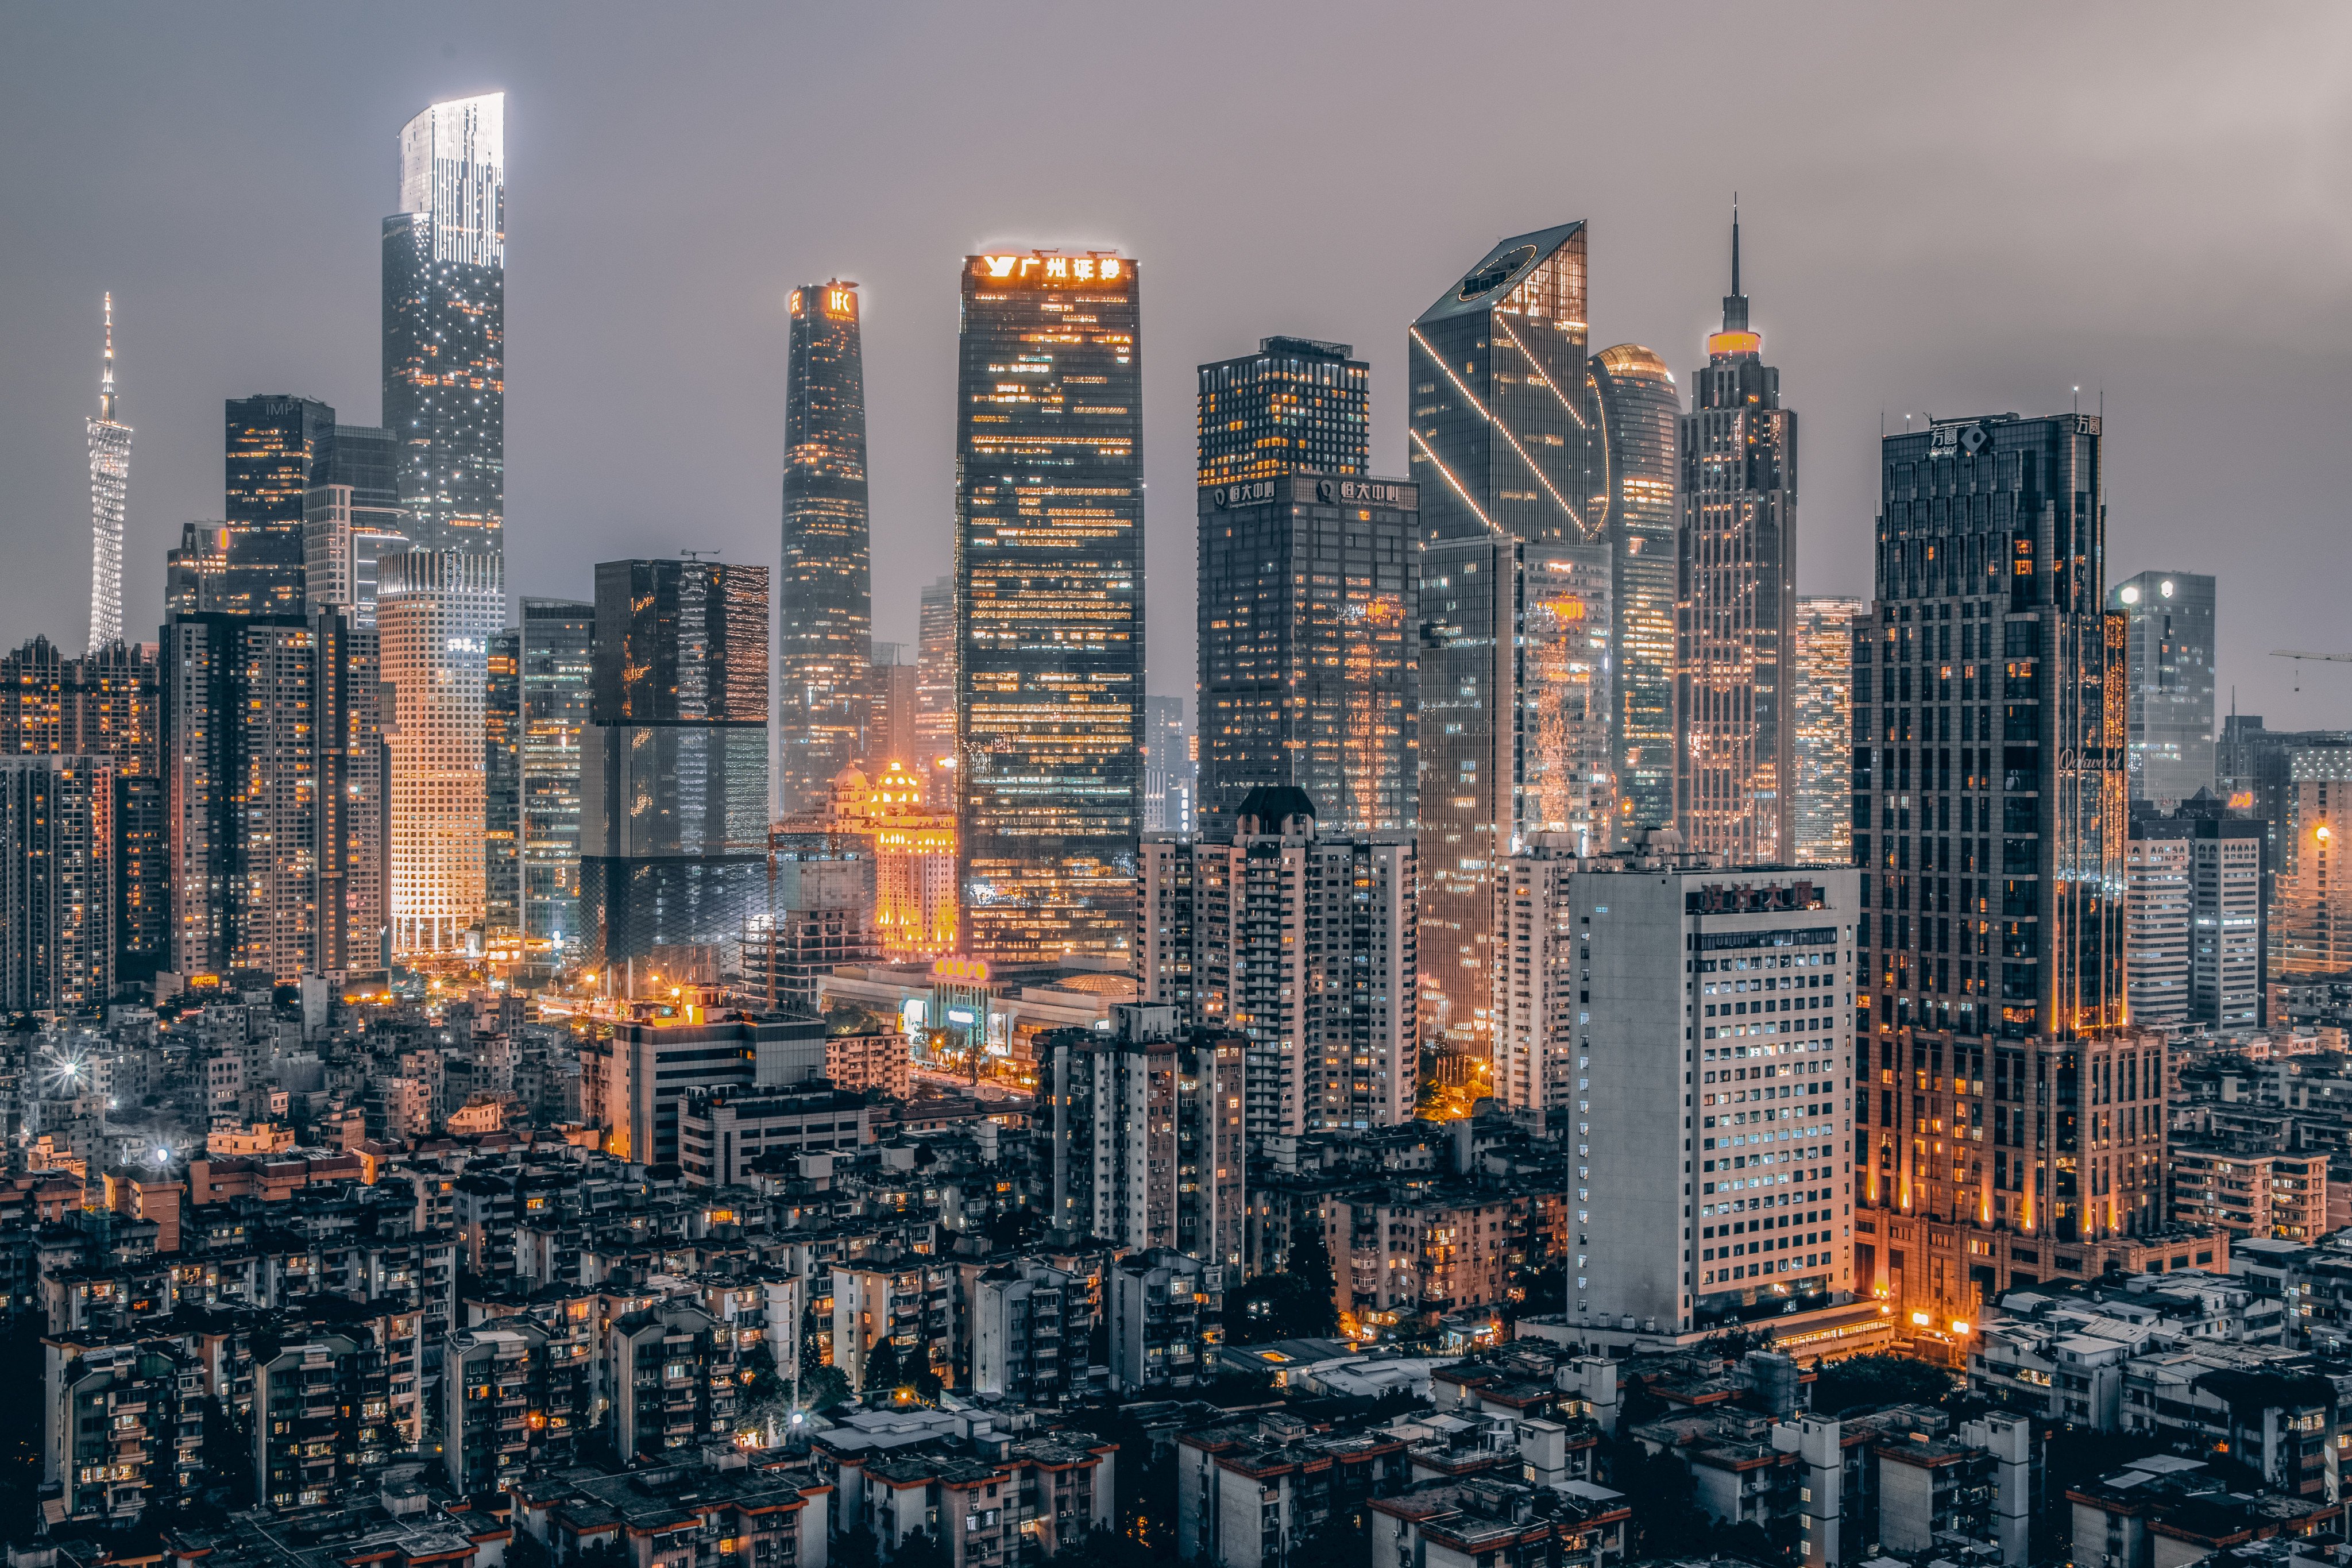 The centre in Guangzhou (pictured) aims to assist Hong Kong companies and entrepreneurs with their businesses in the bay area and identify opportunities. Photo: Shutterstock